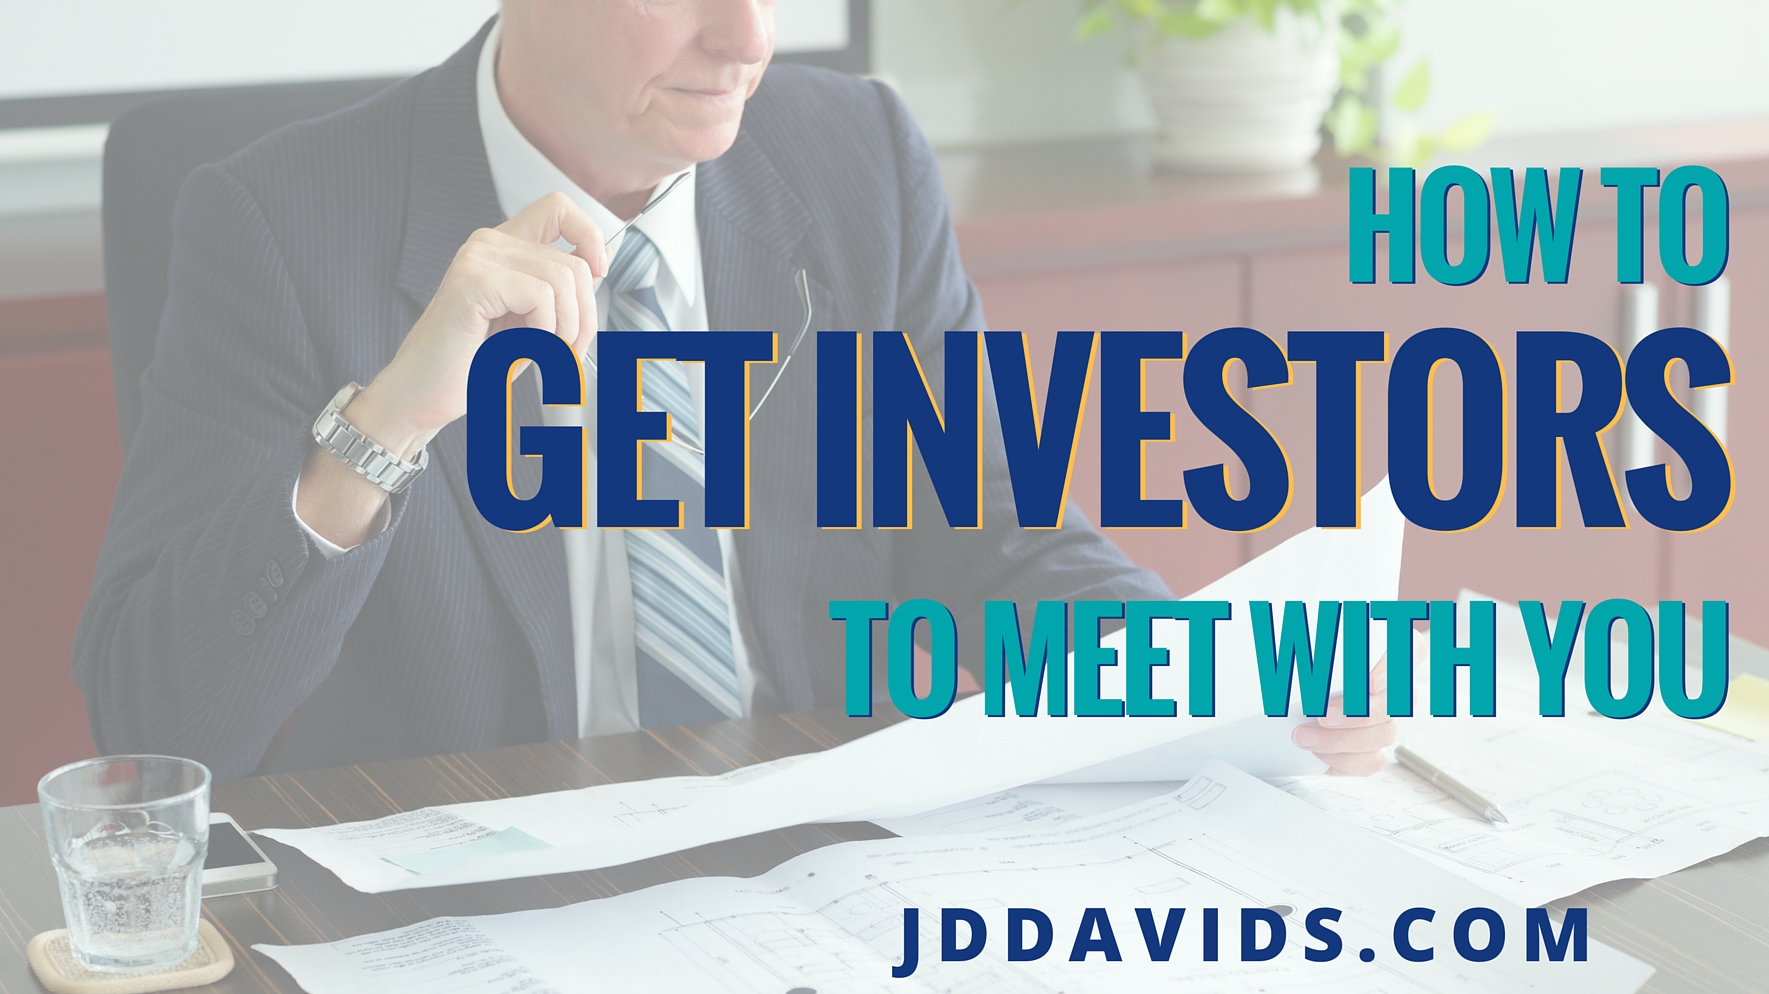 How to Get Investors to Meet With You